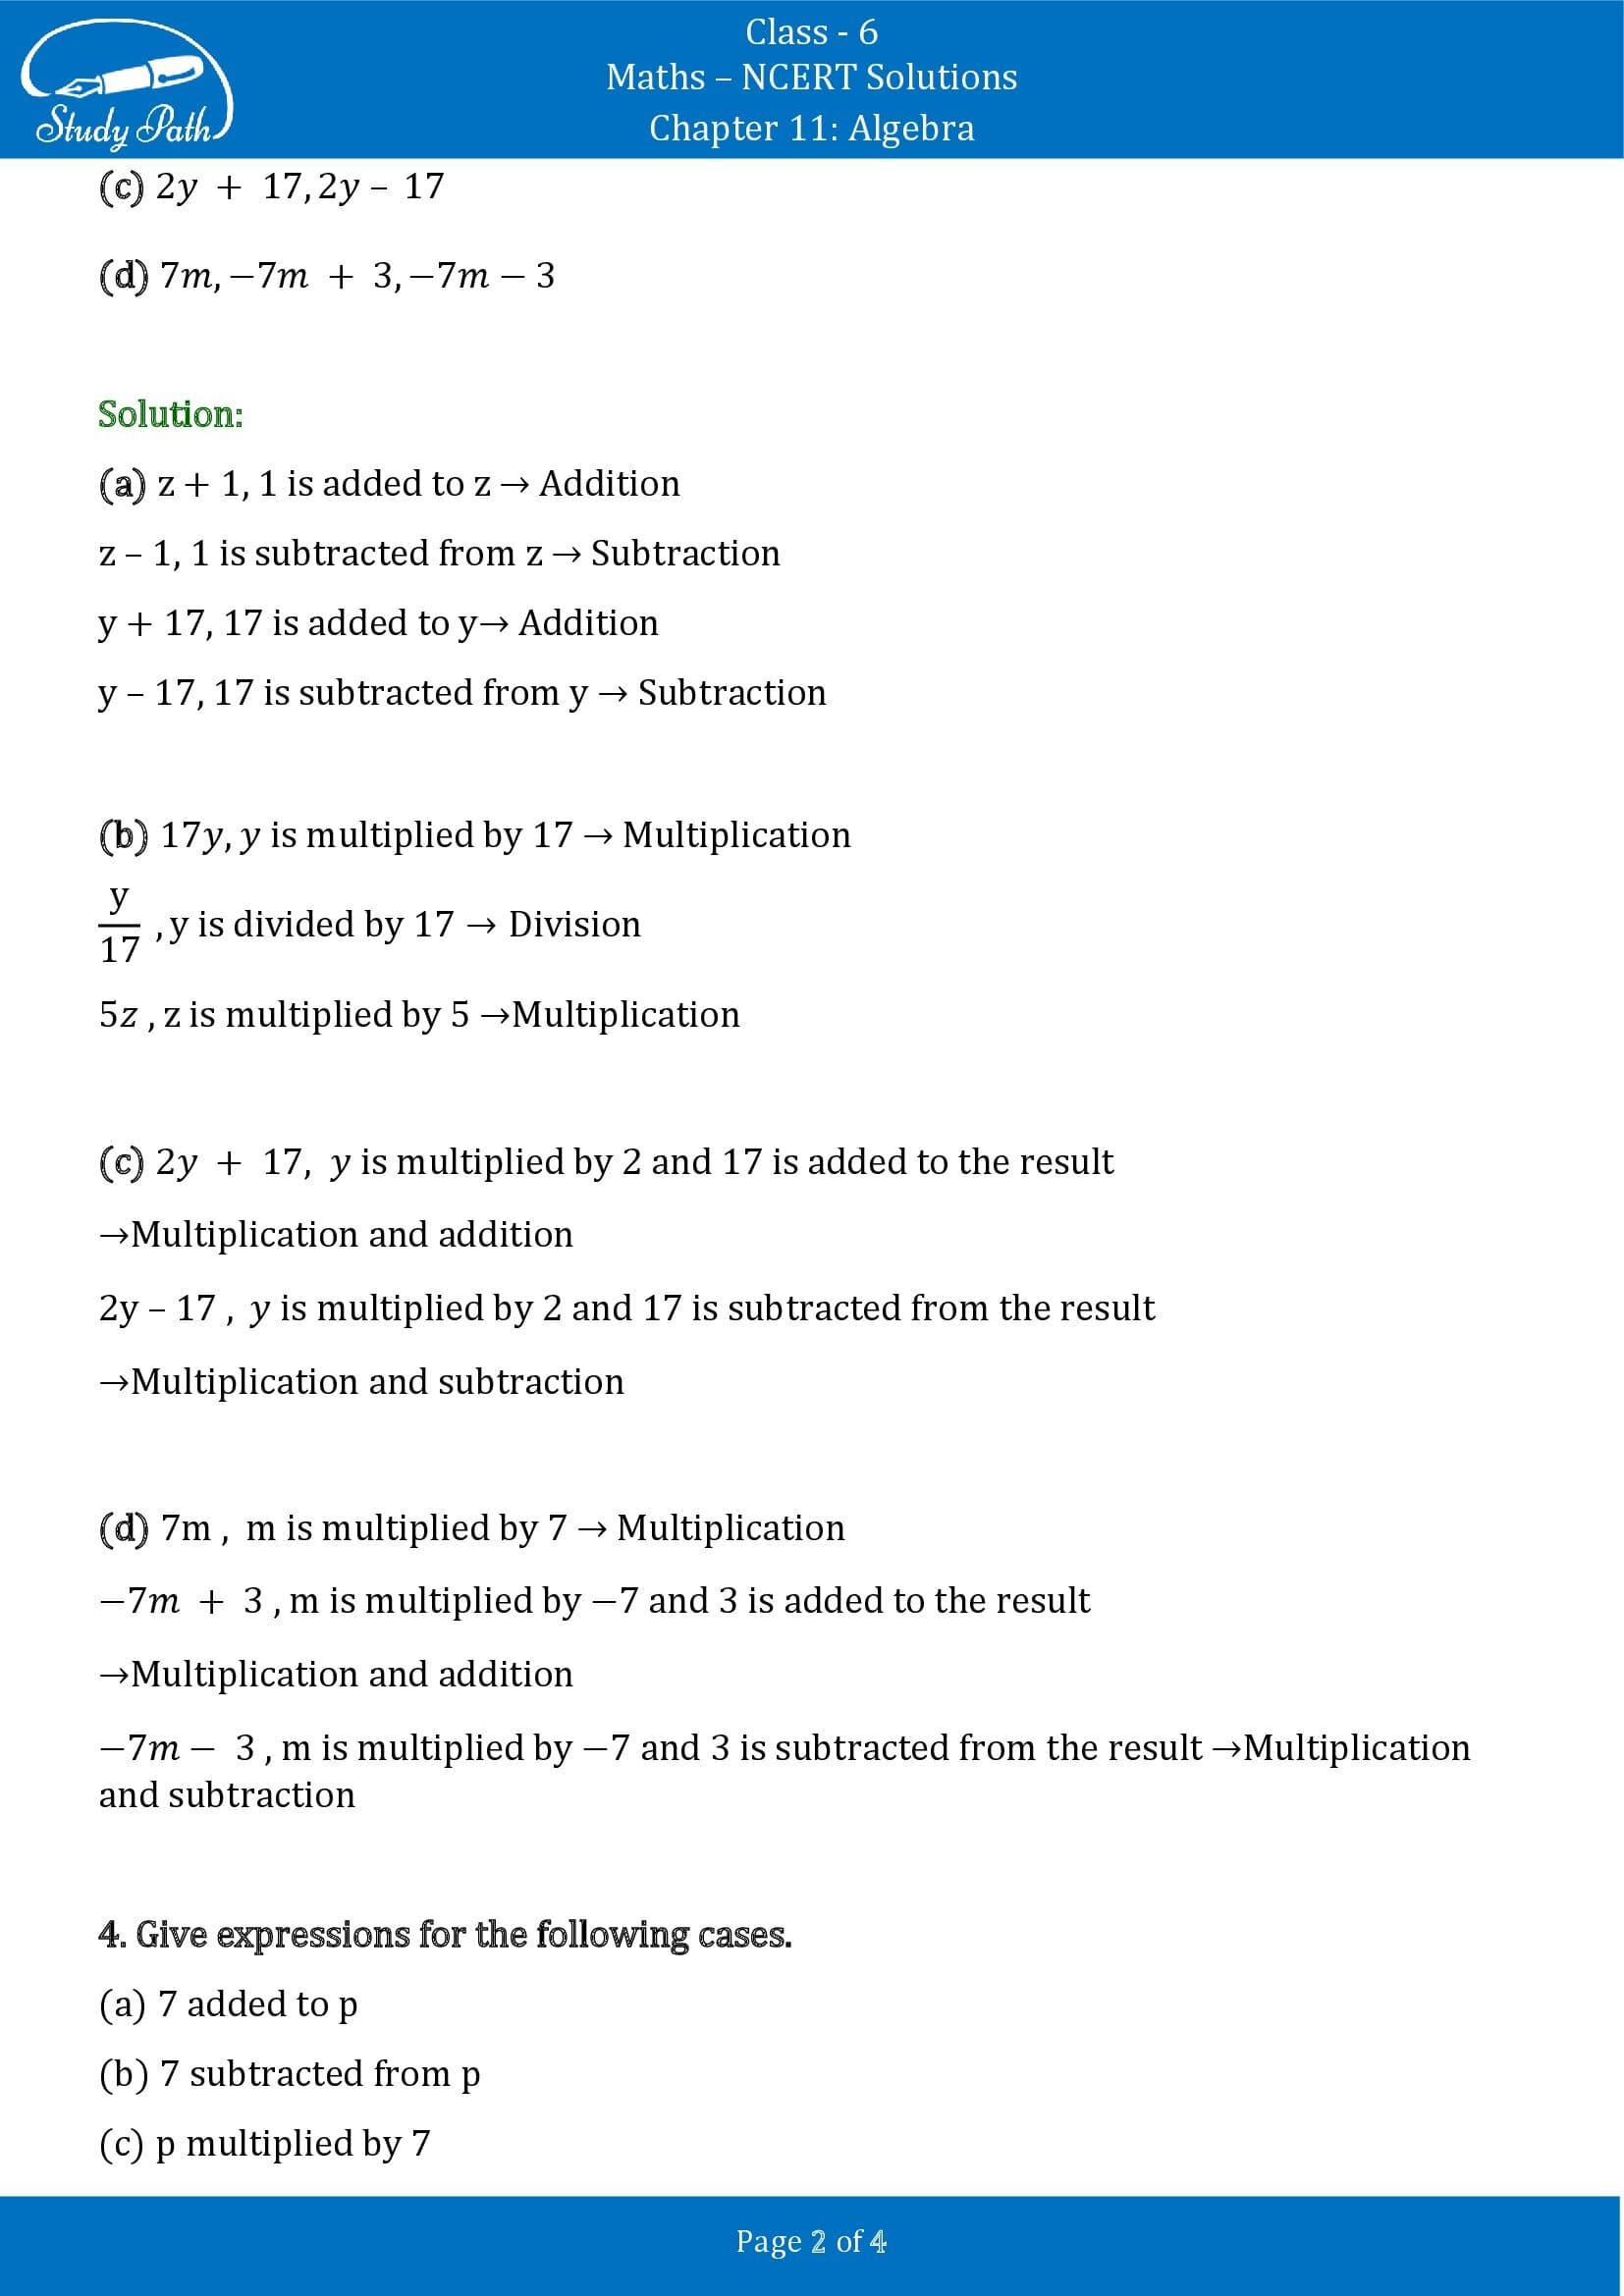 NCERT Solutions for Class 6 Maths Chapter 11 Algebra Exercise 11.3 00002